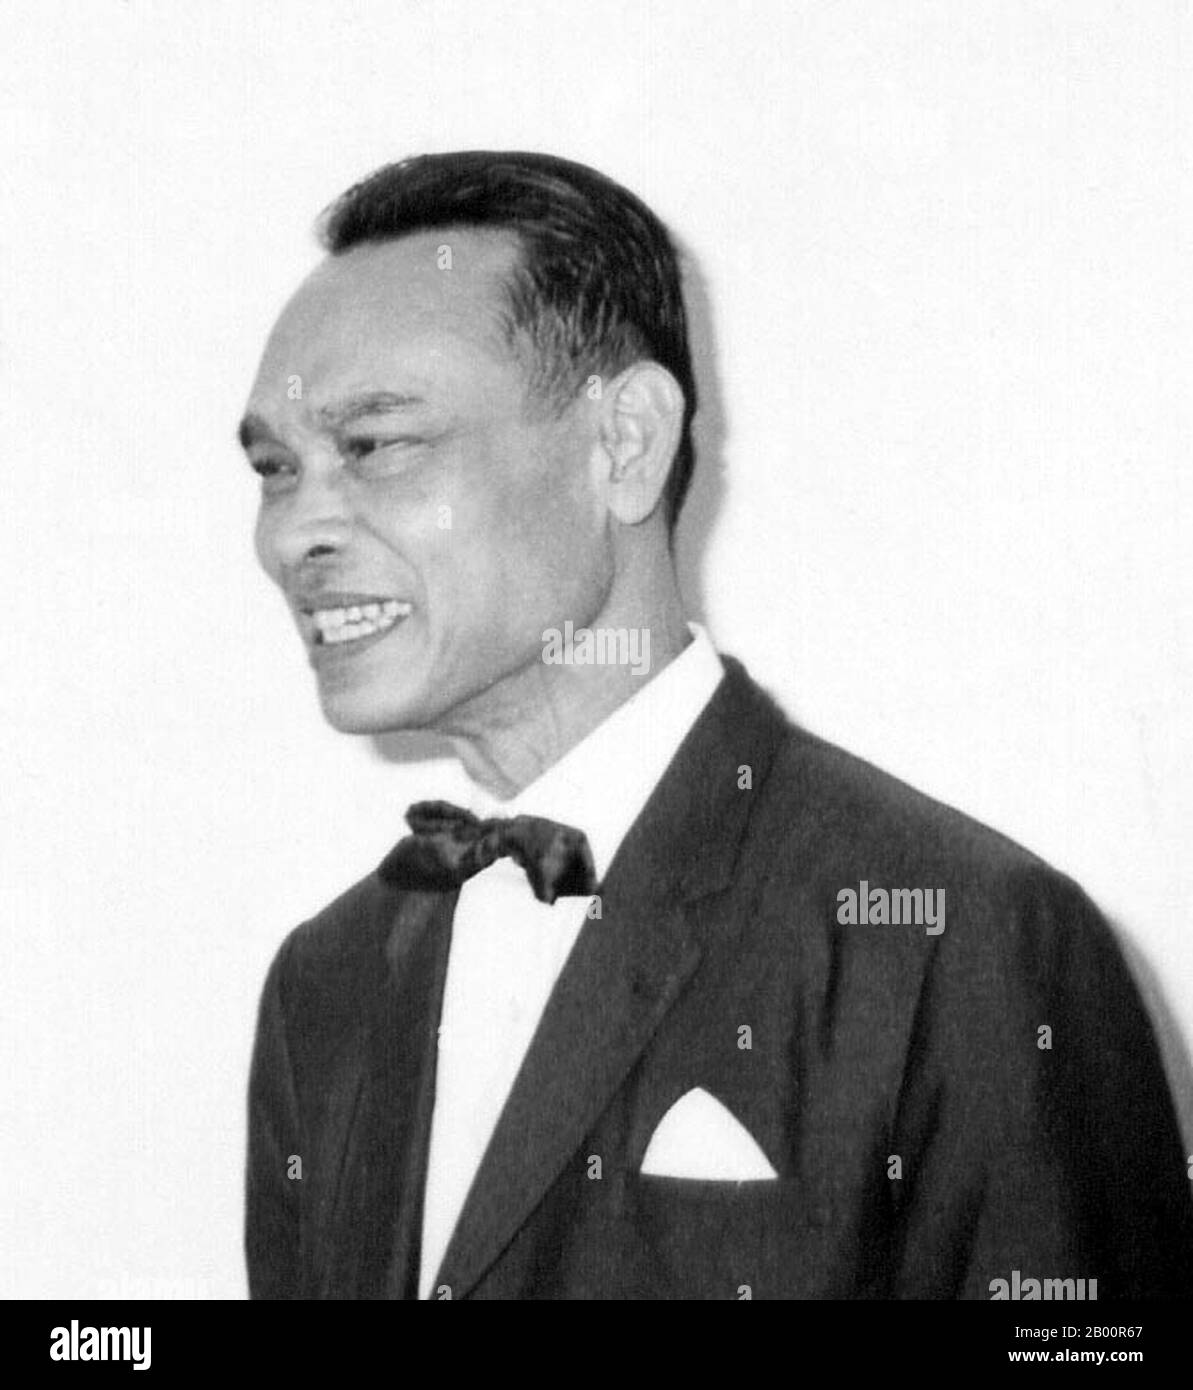 Cambodia: Neak Ang Rajavong Sisowath Sirik Matak (1914-1975).  Prince Sisowath Sirik Matak (January 22, 1914 — April 21, 1975) was a member of the Cambodian royal family. He was mainly notable for his involvement in the 1970 right-wing coup against his cousin, Prince Norodom Sihanouk, and for his subsequent establishment, along with Lon Nol, of the Khmer Republic. He refused to flee the advancing Khmer Rouge and was captured and executed in April 1975. Stock Photo